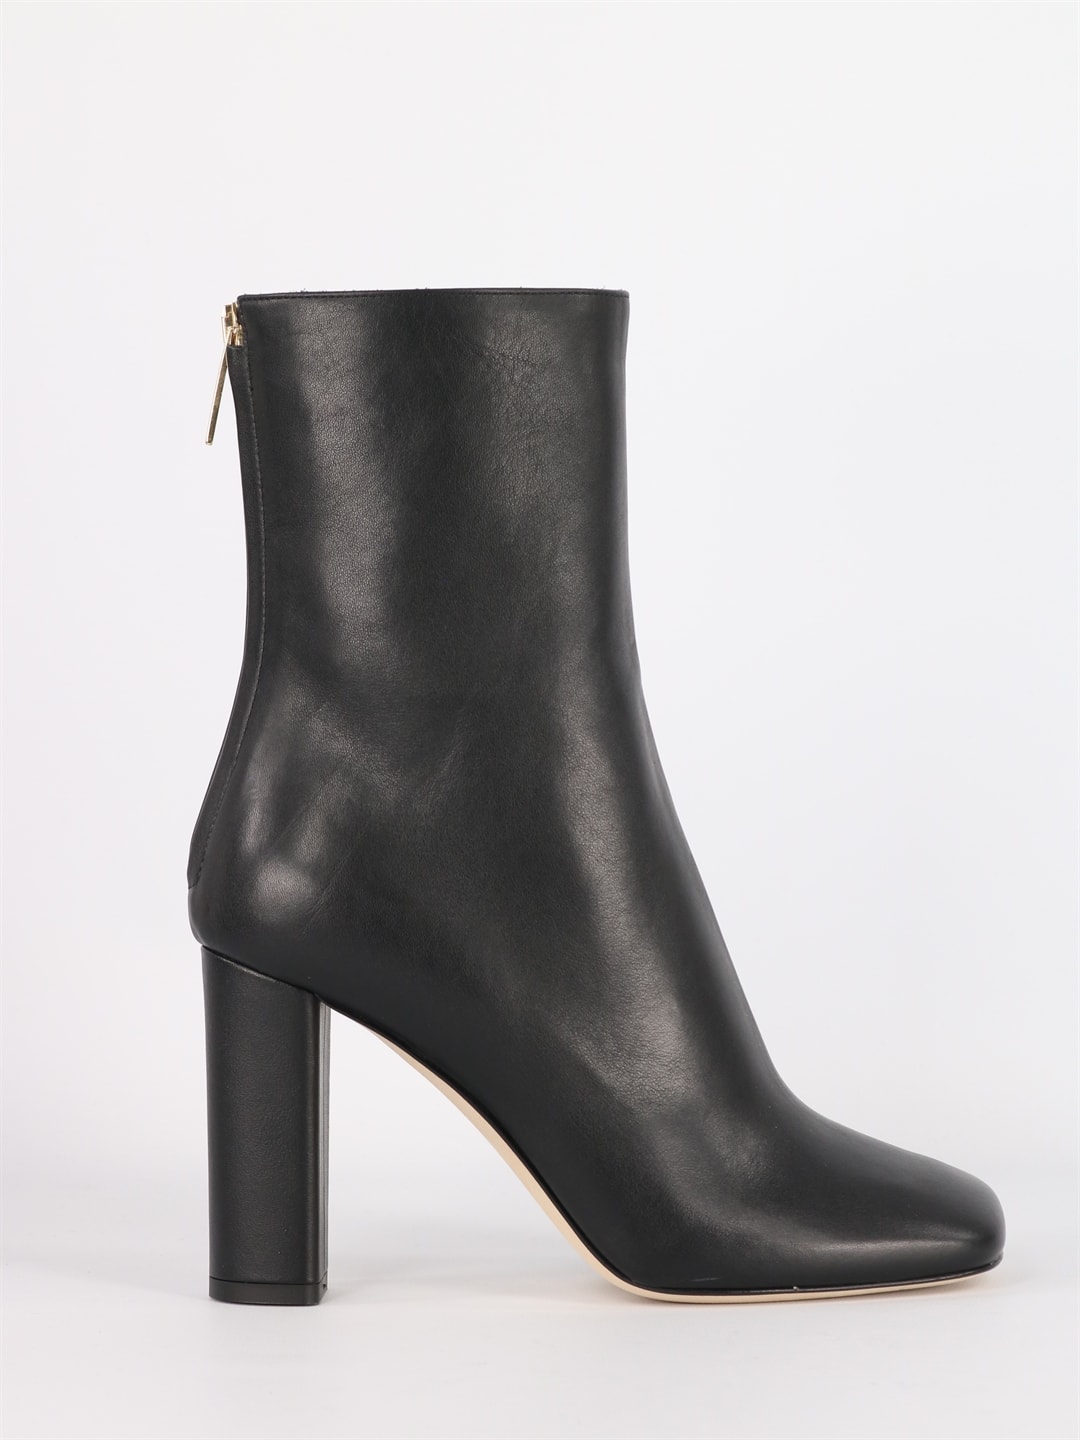 Paris Texas Squared Toe Ankle Boot